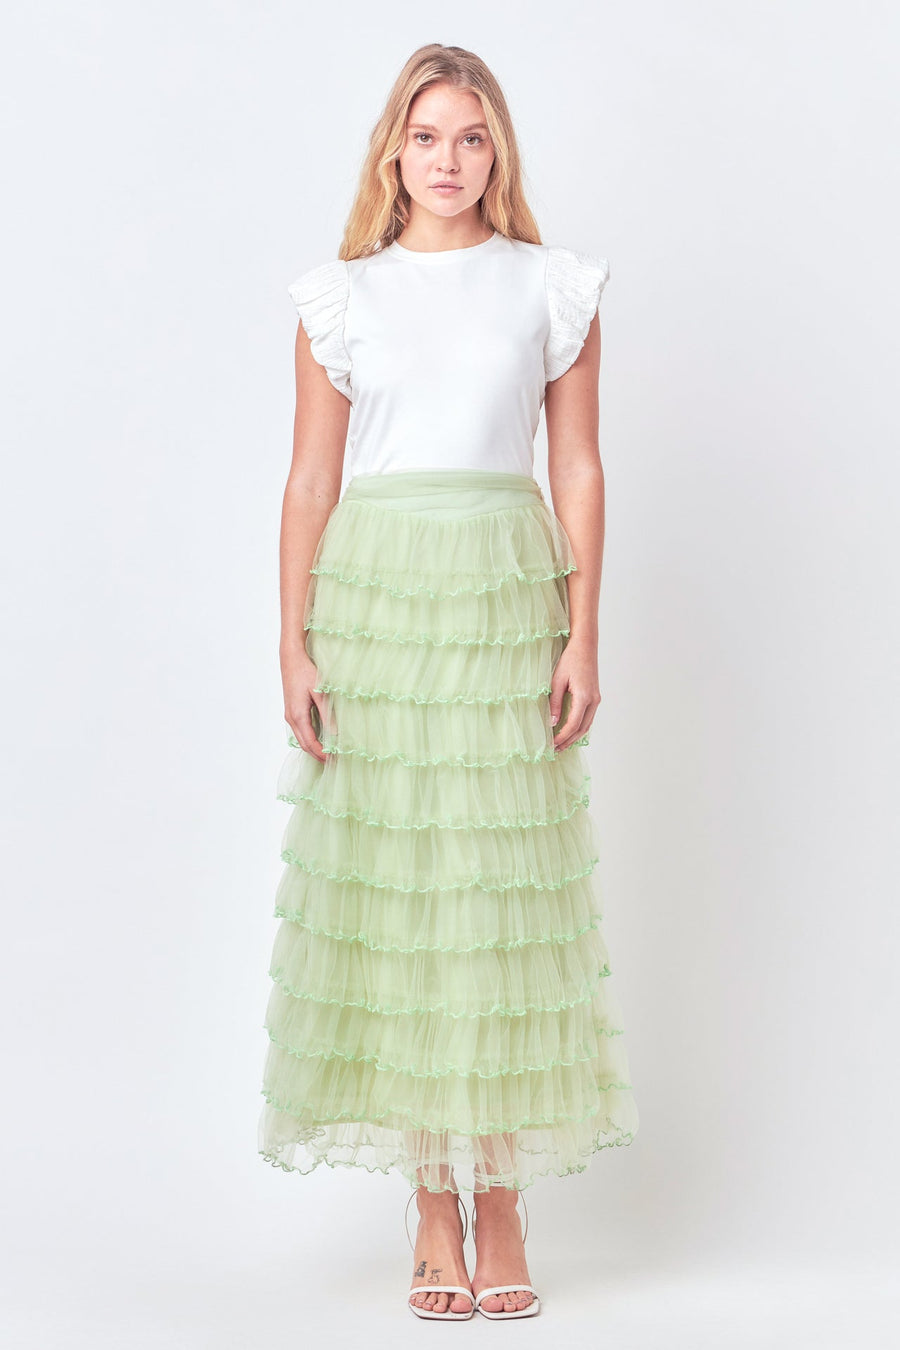 FREE THE ROSES-Layered Tulle Midi Skirt-SKIRTS available at Objectrare